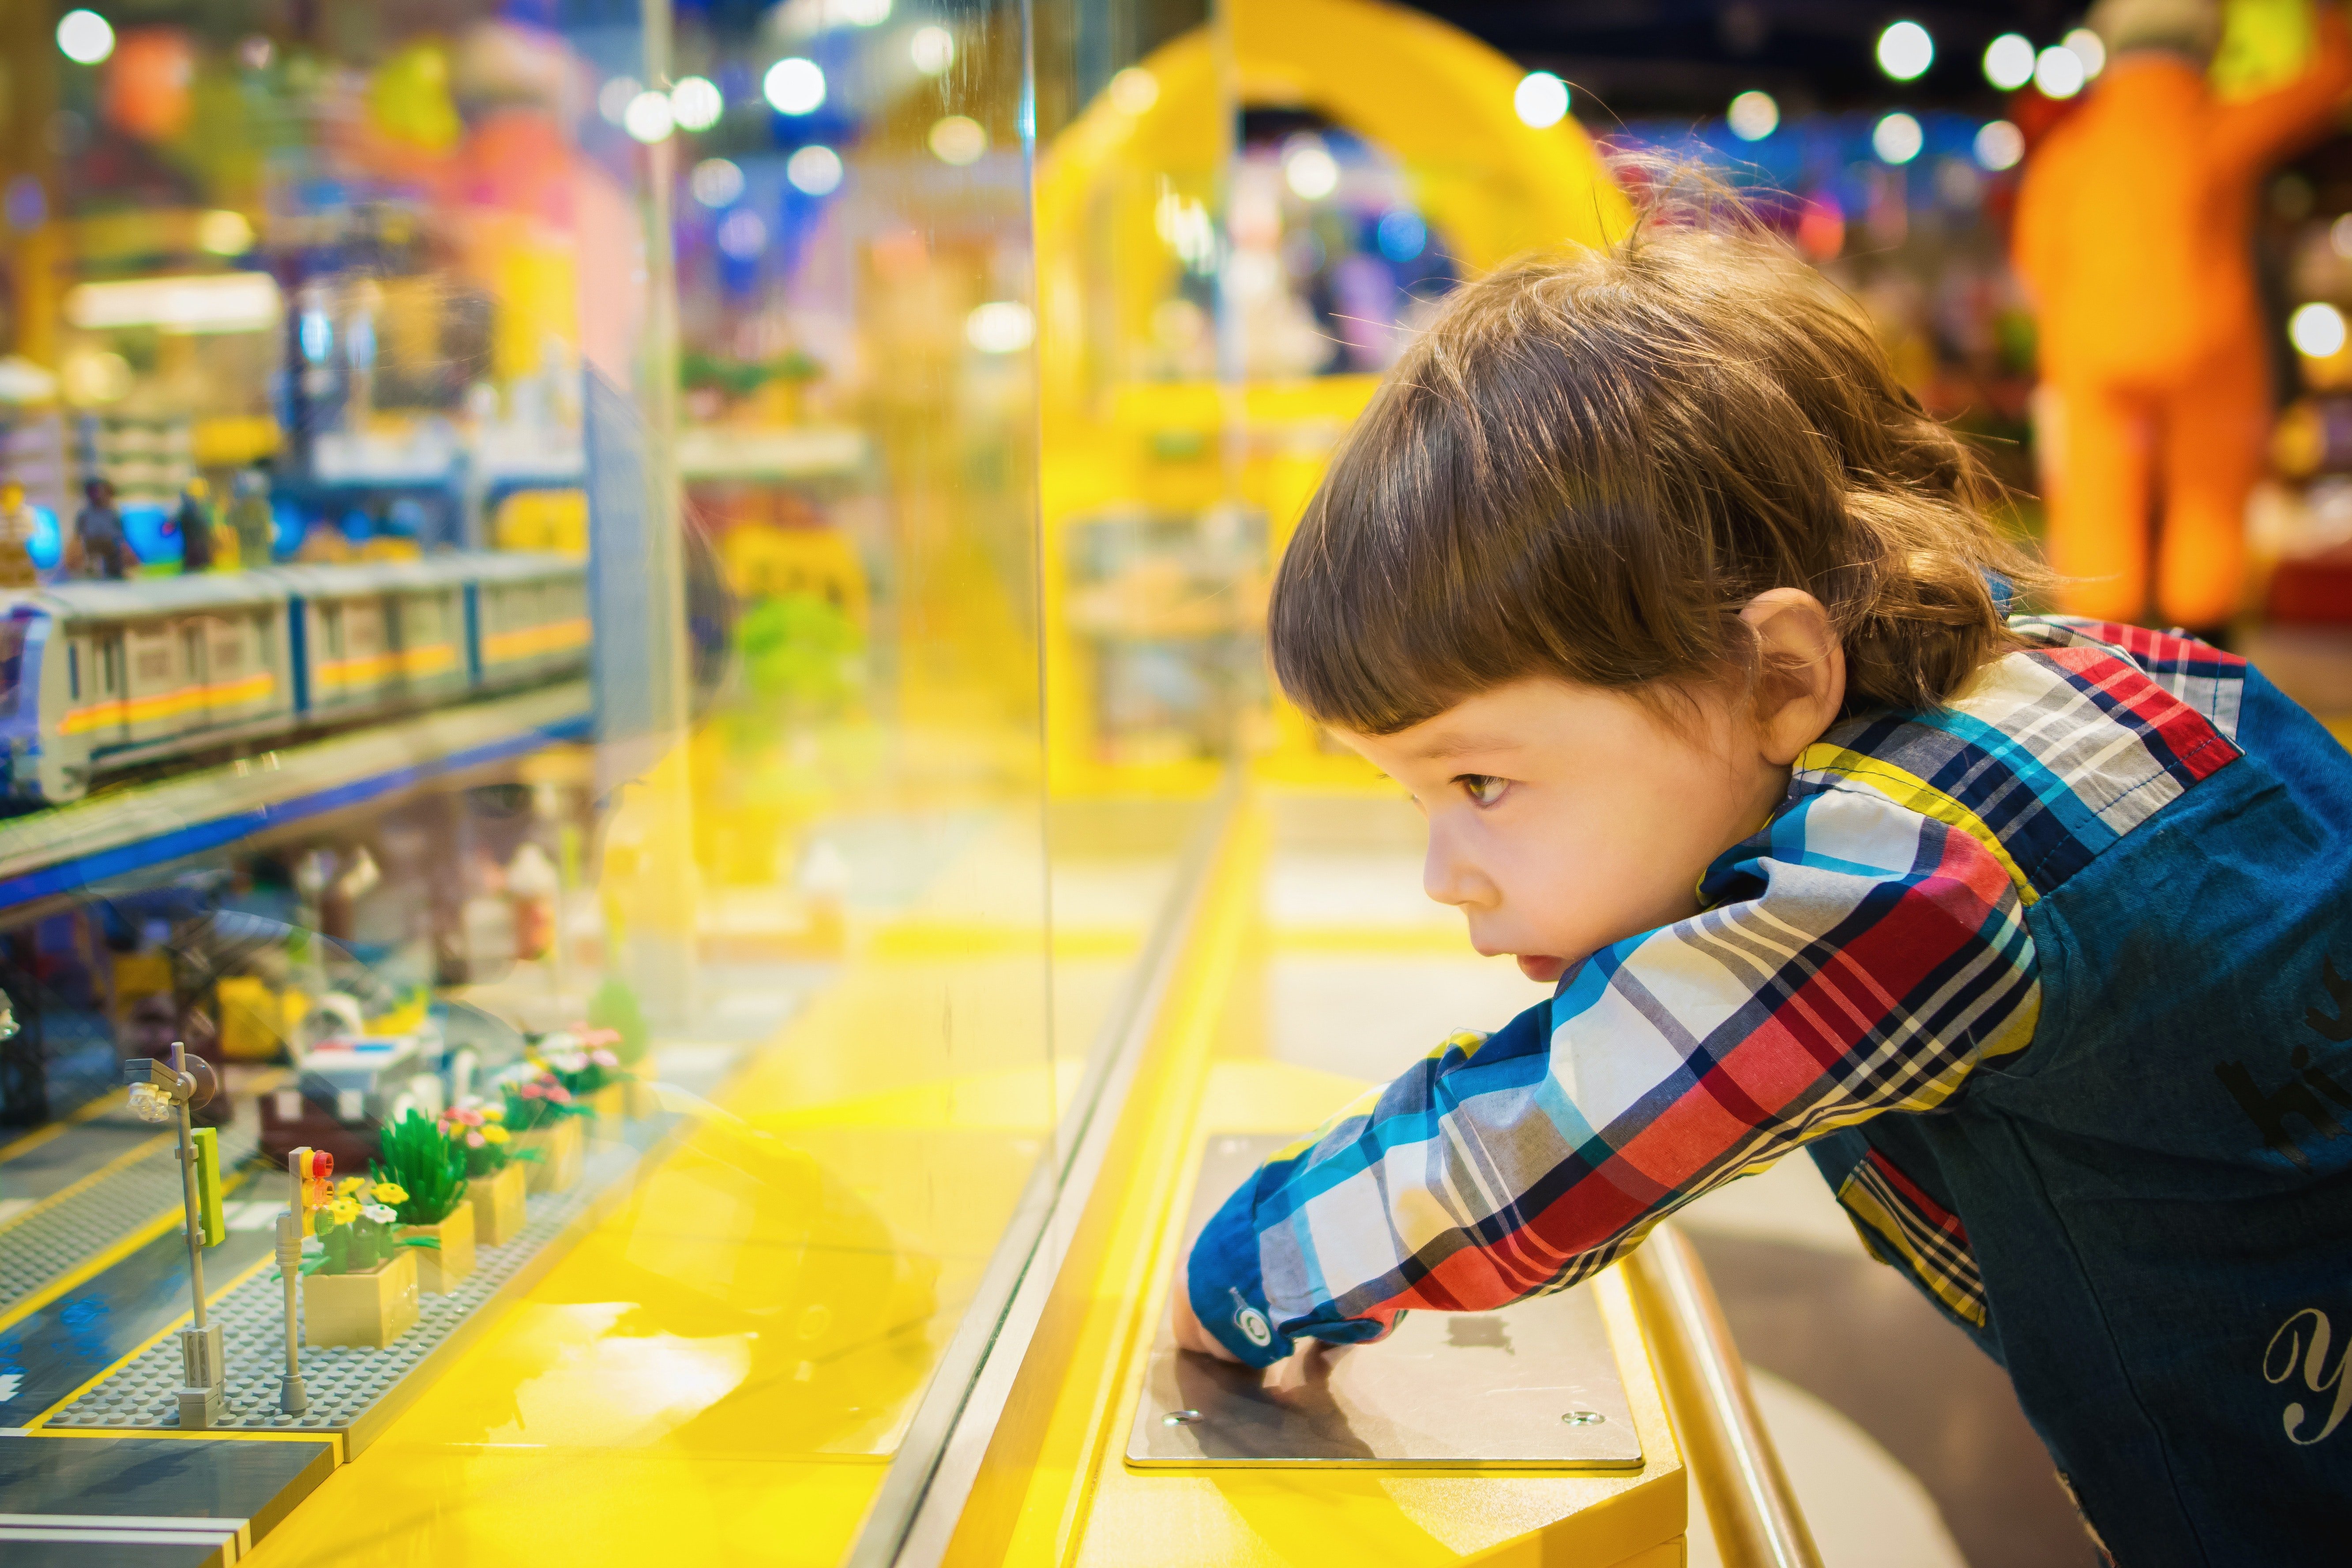 Matt went to the toy store after receiving good grades at school. | Source: Pexels